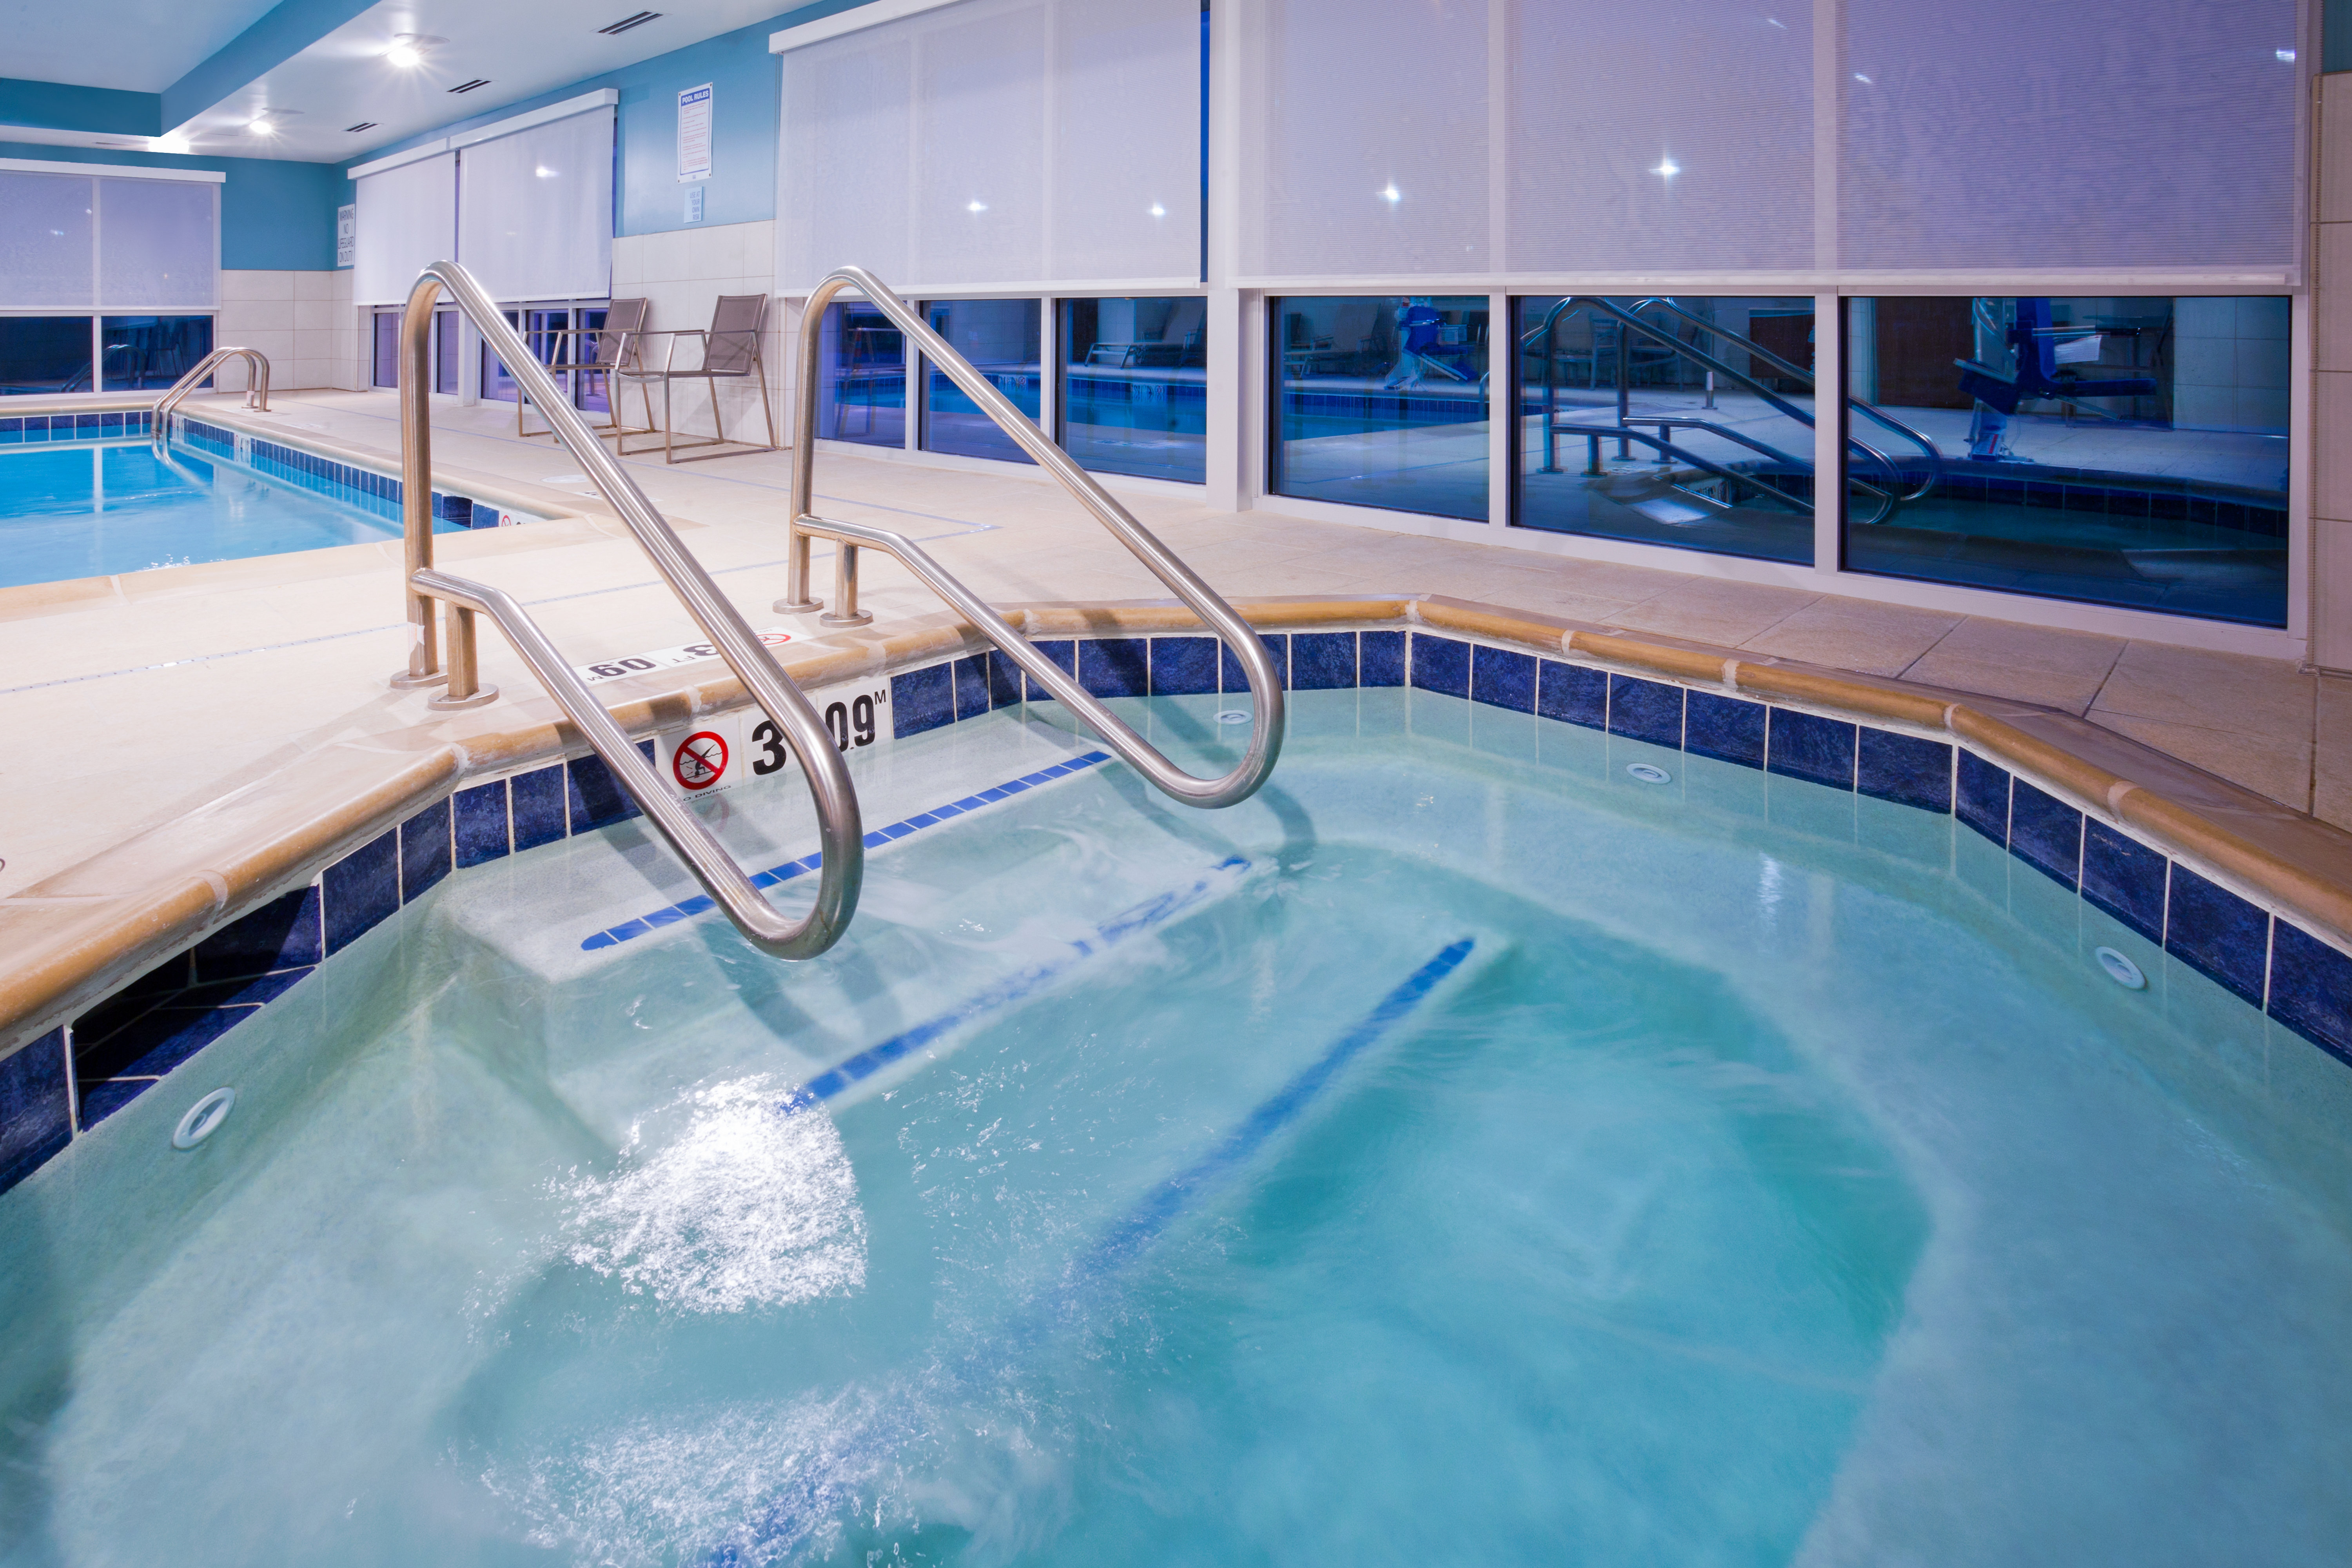 Relax in the Holiday Inn Express & Suites Hot Tub near DSM